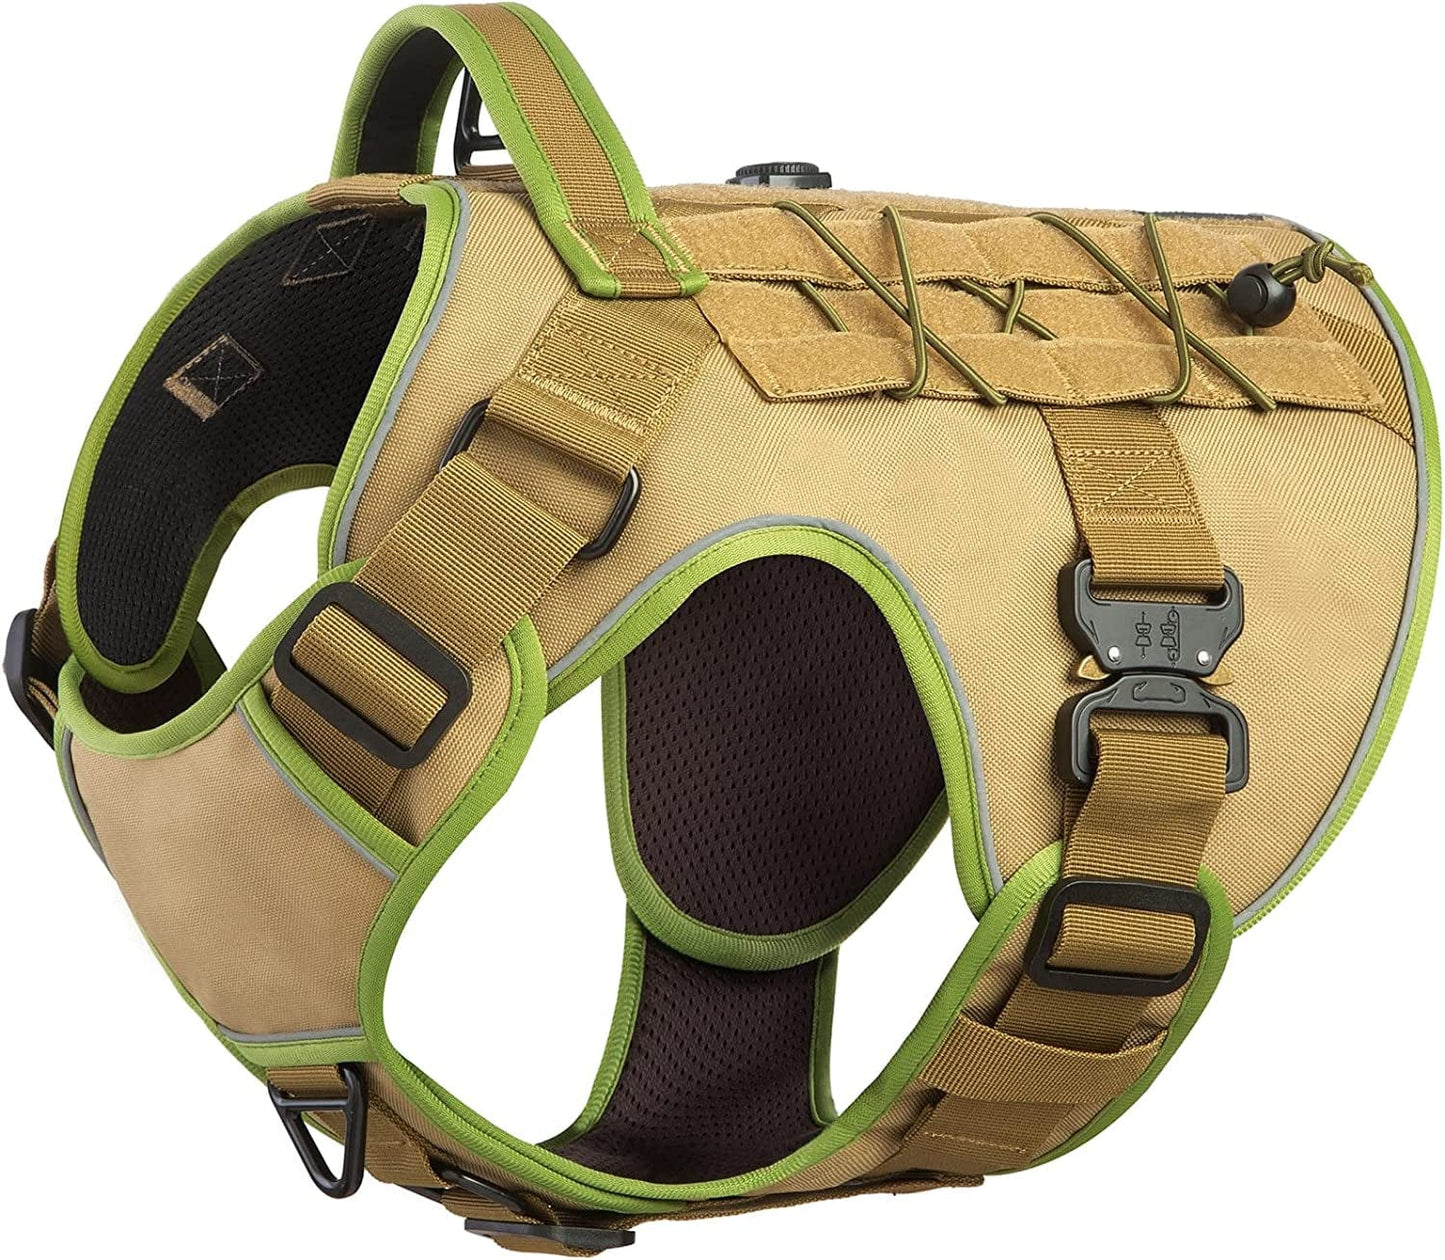 DNALLRINO Tactical Dog Harness for Large Medium Dogs, Heavy Duty Military Dog Harness with Handle, Adjustable No Pull Service Dog Harness with Molle & Loop Panels for Hiking Walking Training Animals & Pet Supplies > Pet Supplies > Dog Supplies > Dog Apparel Dnallrino Brown L (Neck: 19" - 27", Chest: 28.5"-37") 